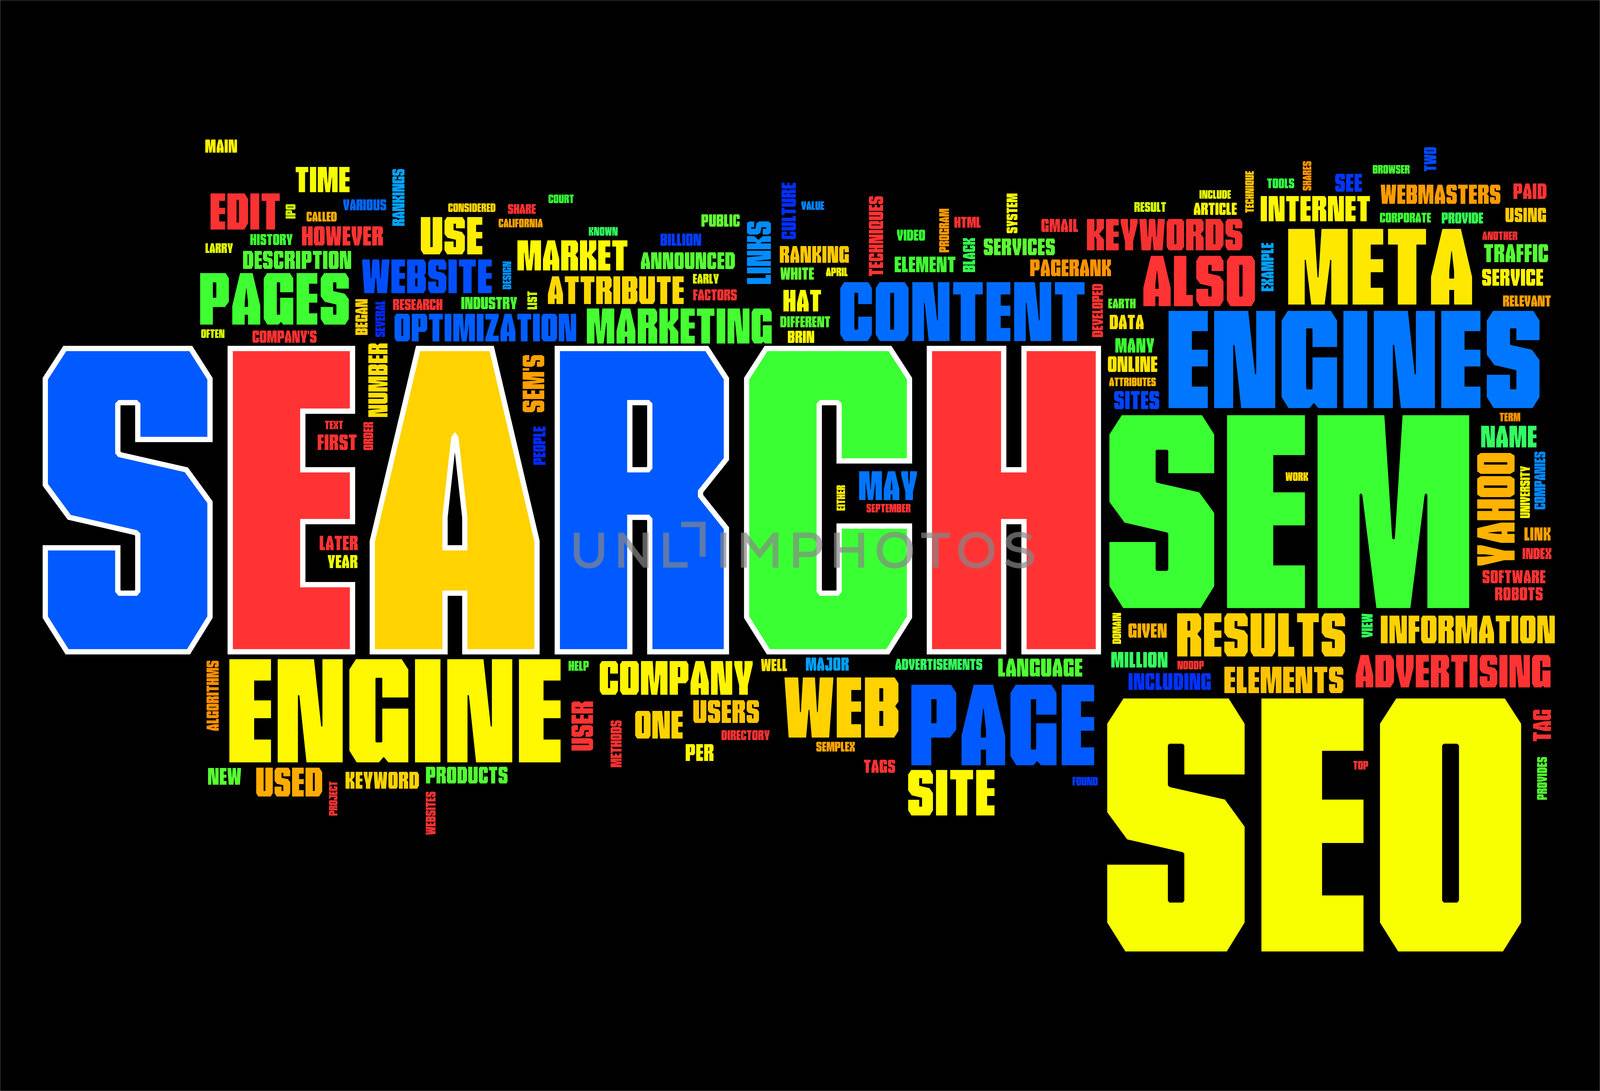 Search Engine on Internet